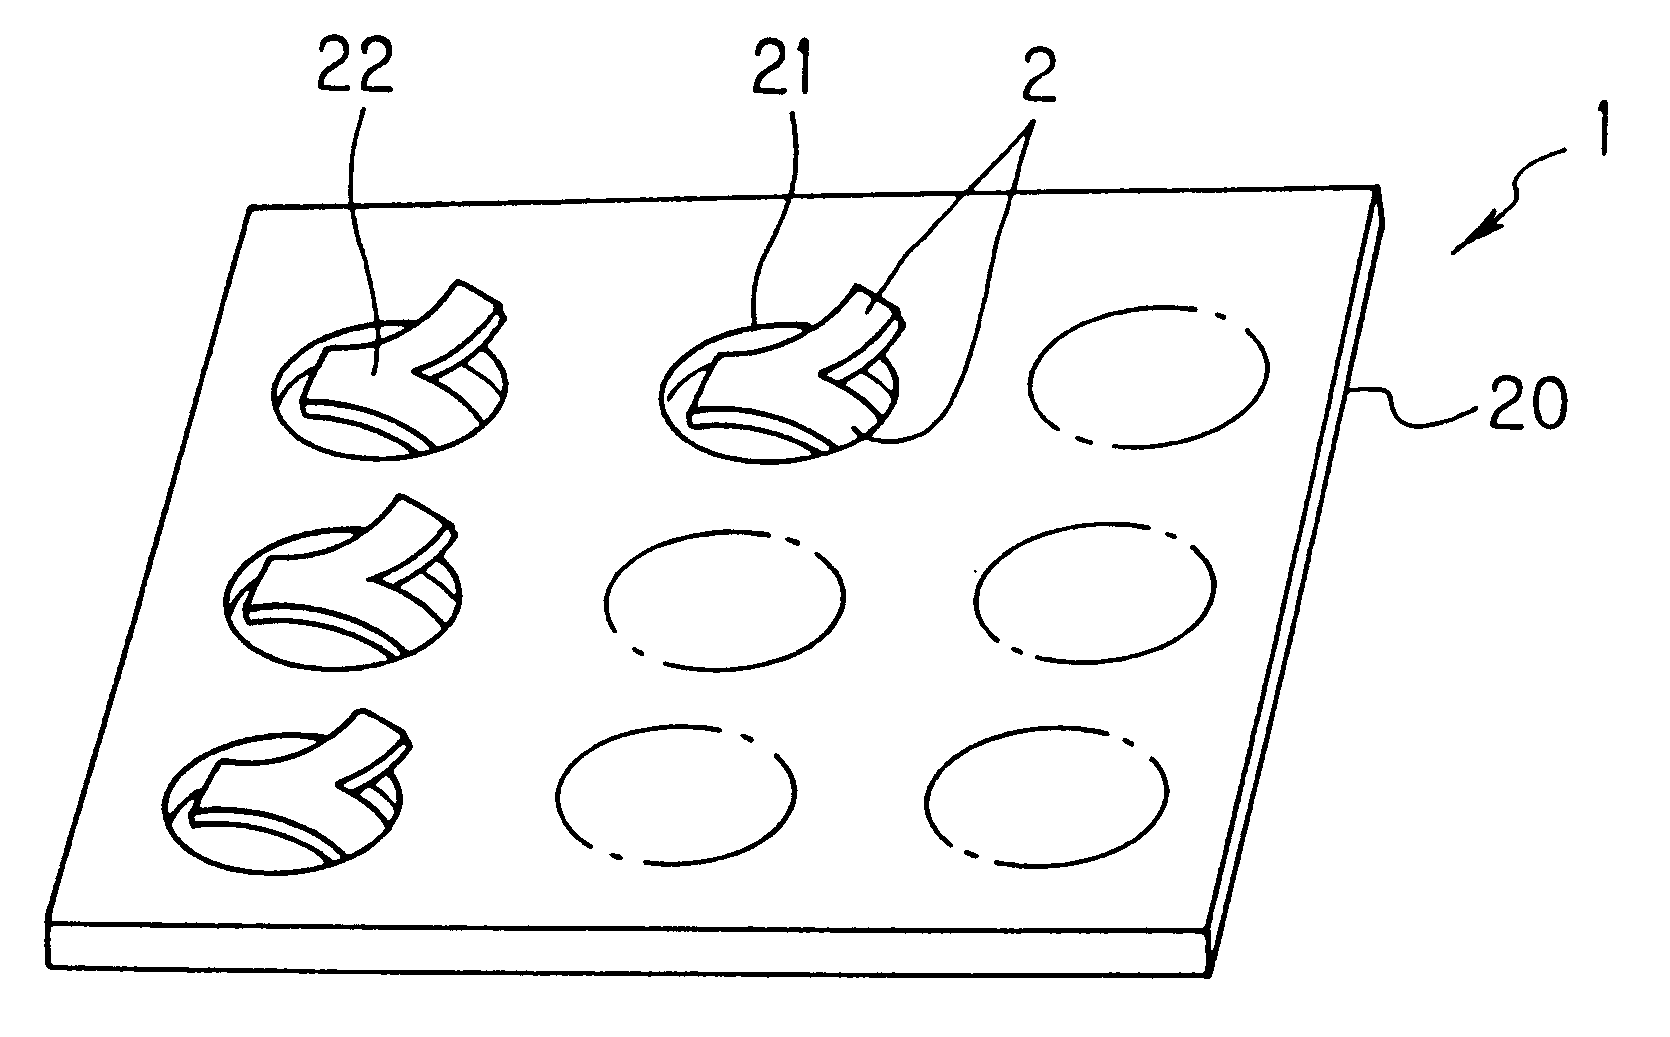 Conduction assist member and manufacturing method of the same